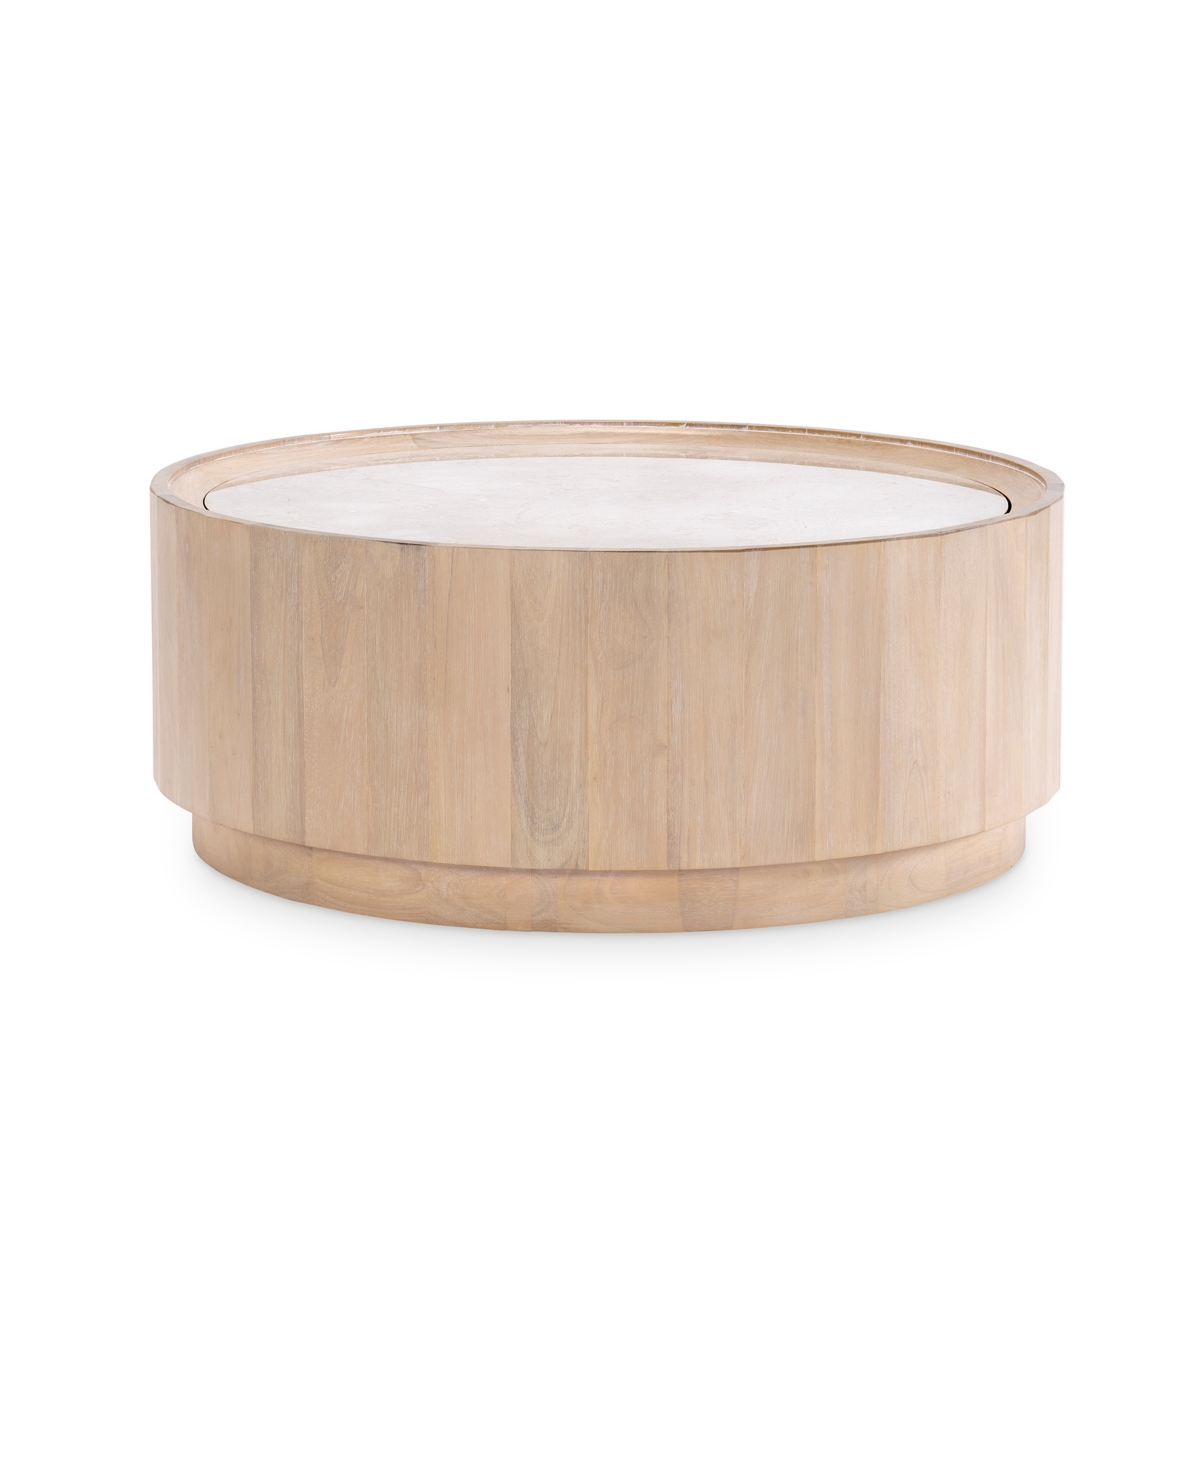 Furniture Biscayne 40" Wood With Travertine Top Round Cocktail Table In Malabar With Alabaster Fronts